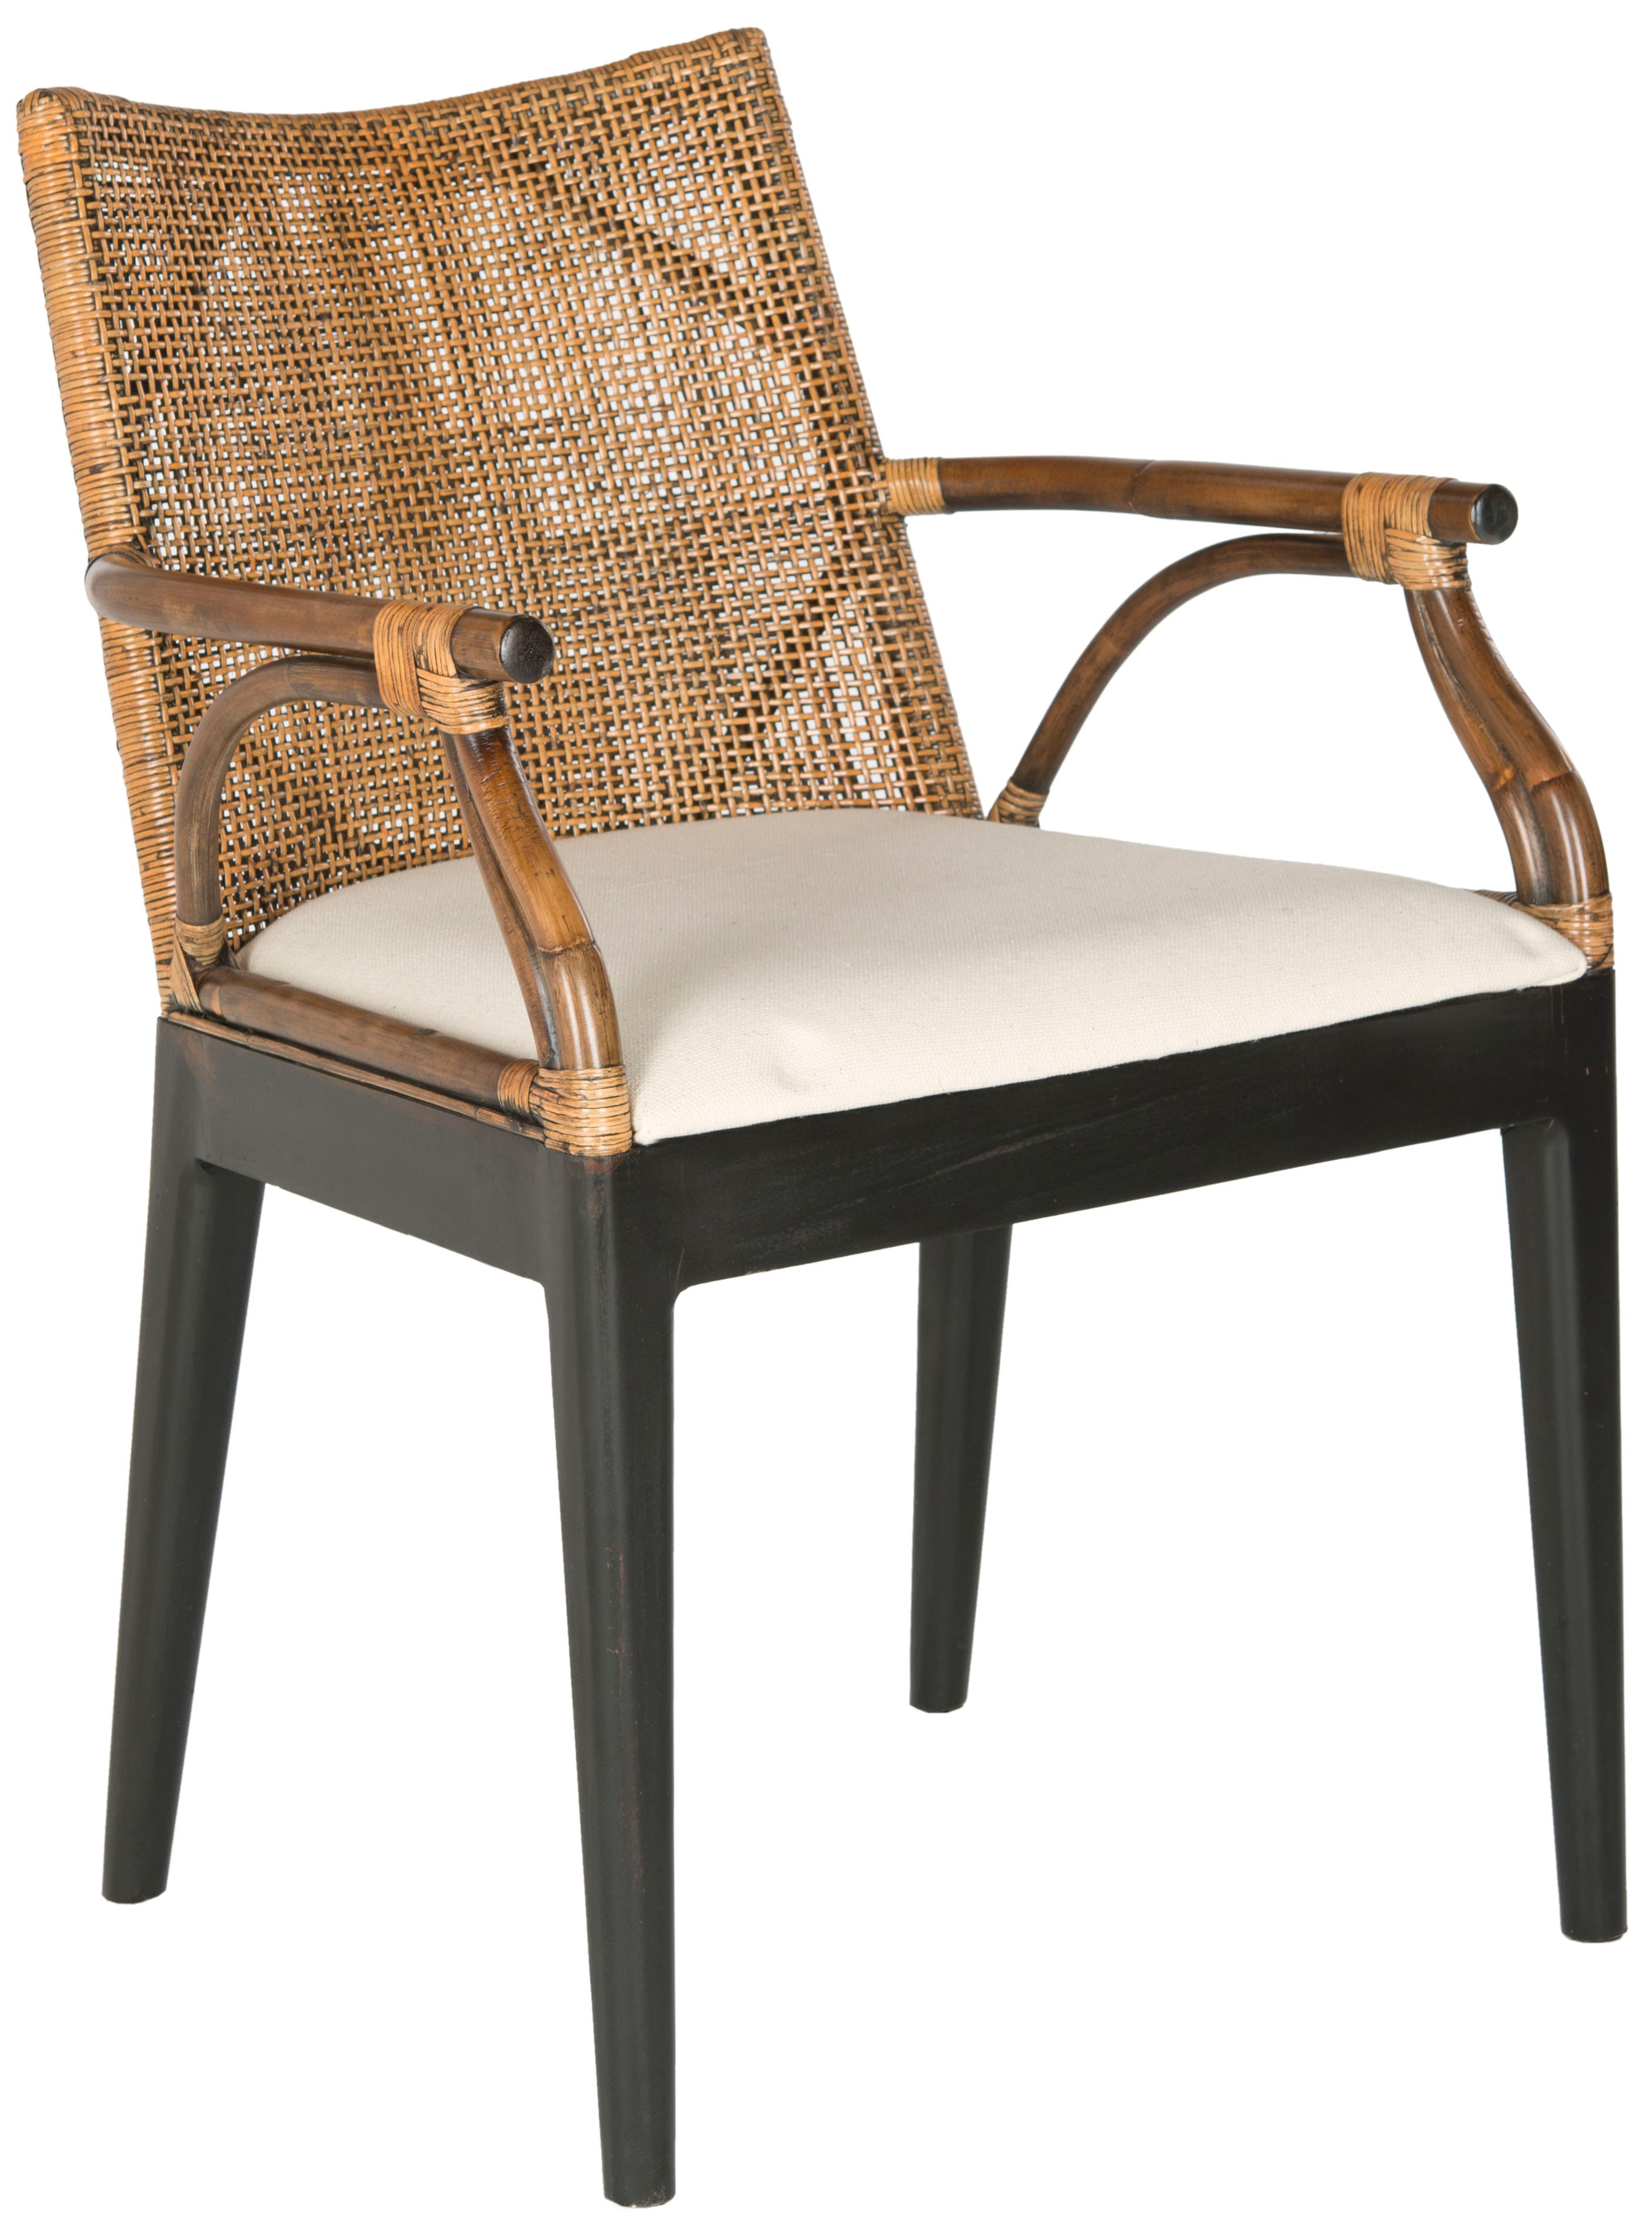 Gianni Arm Chair in Brown